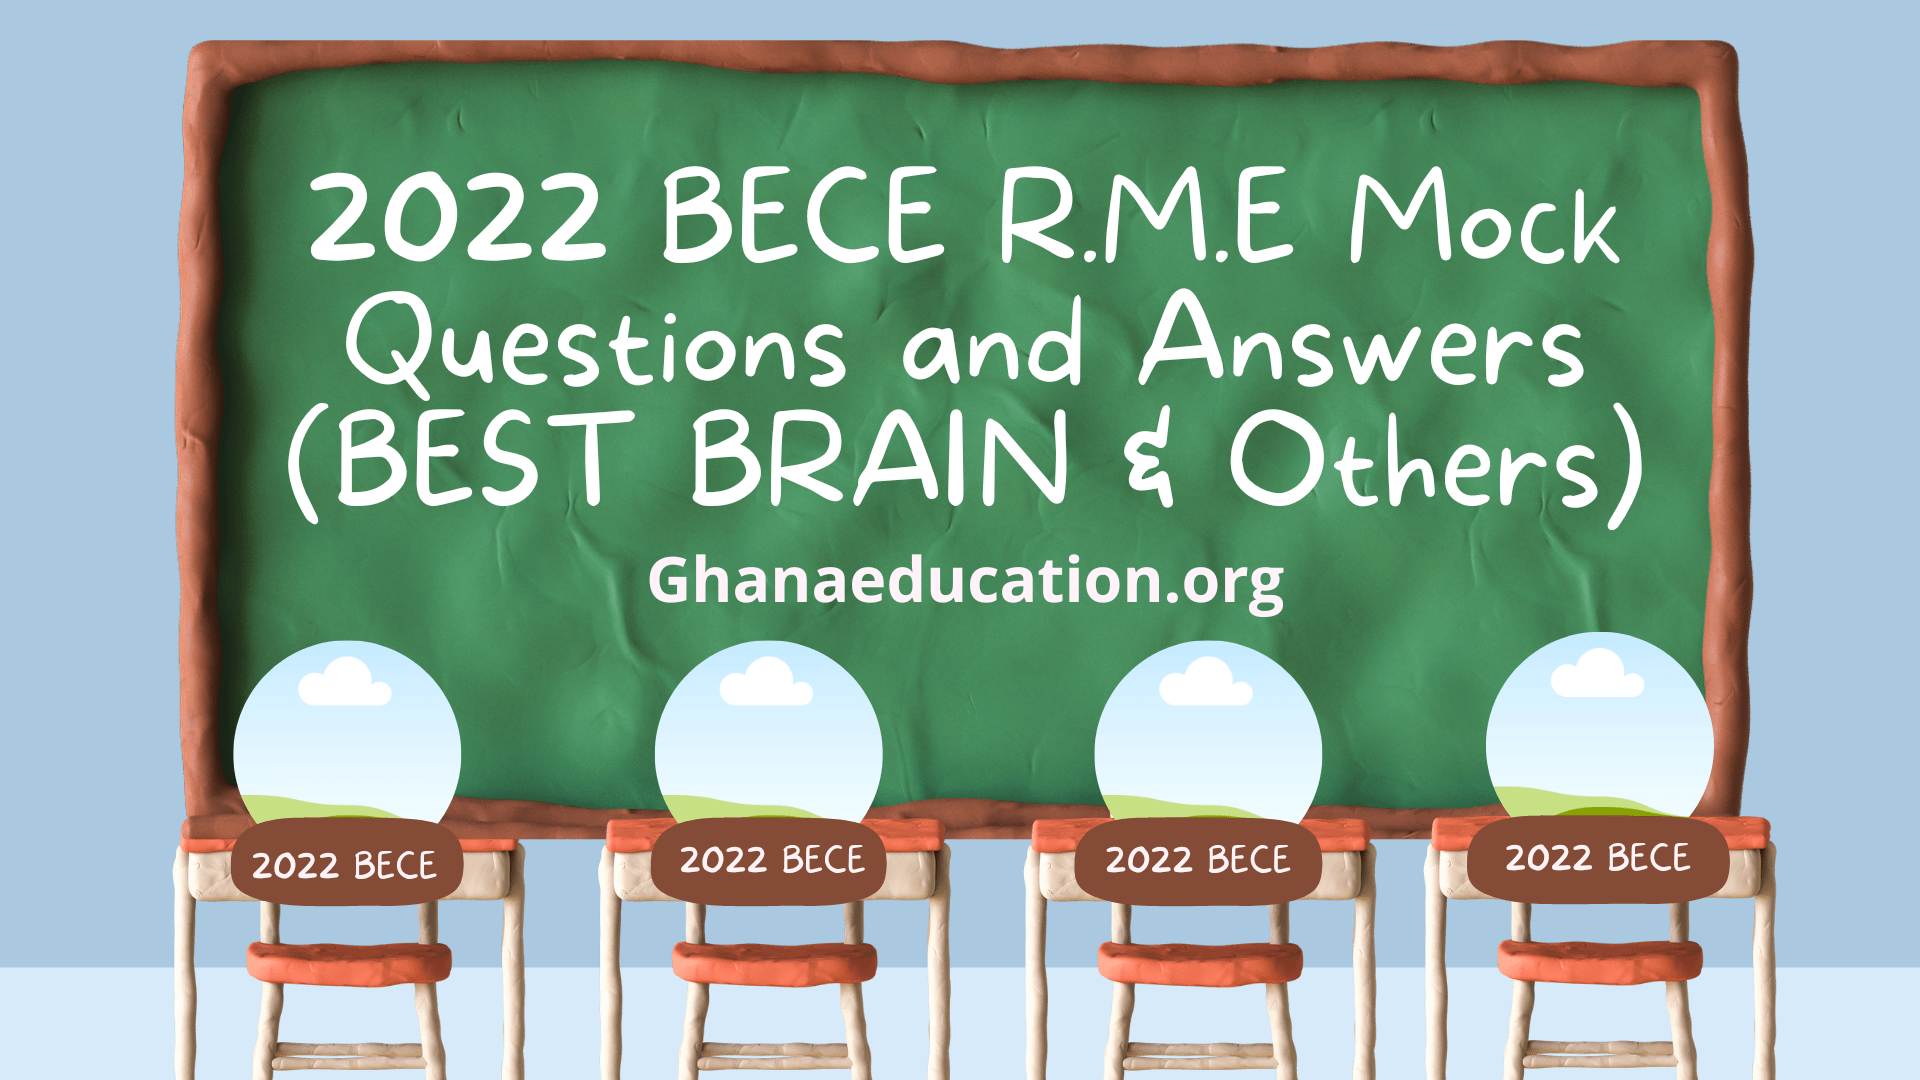 2022 BECE R.M.E Mock Questions and Answers (BEST BRAIN & Others)